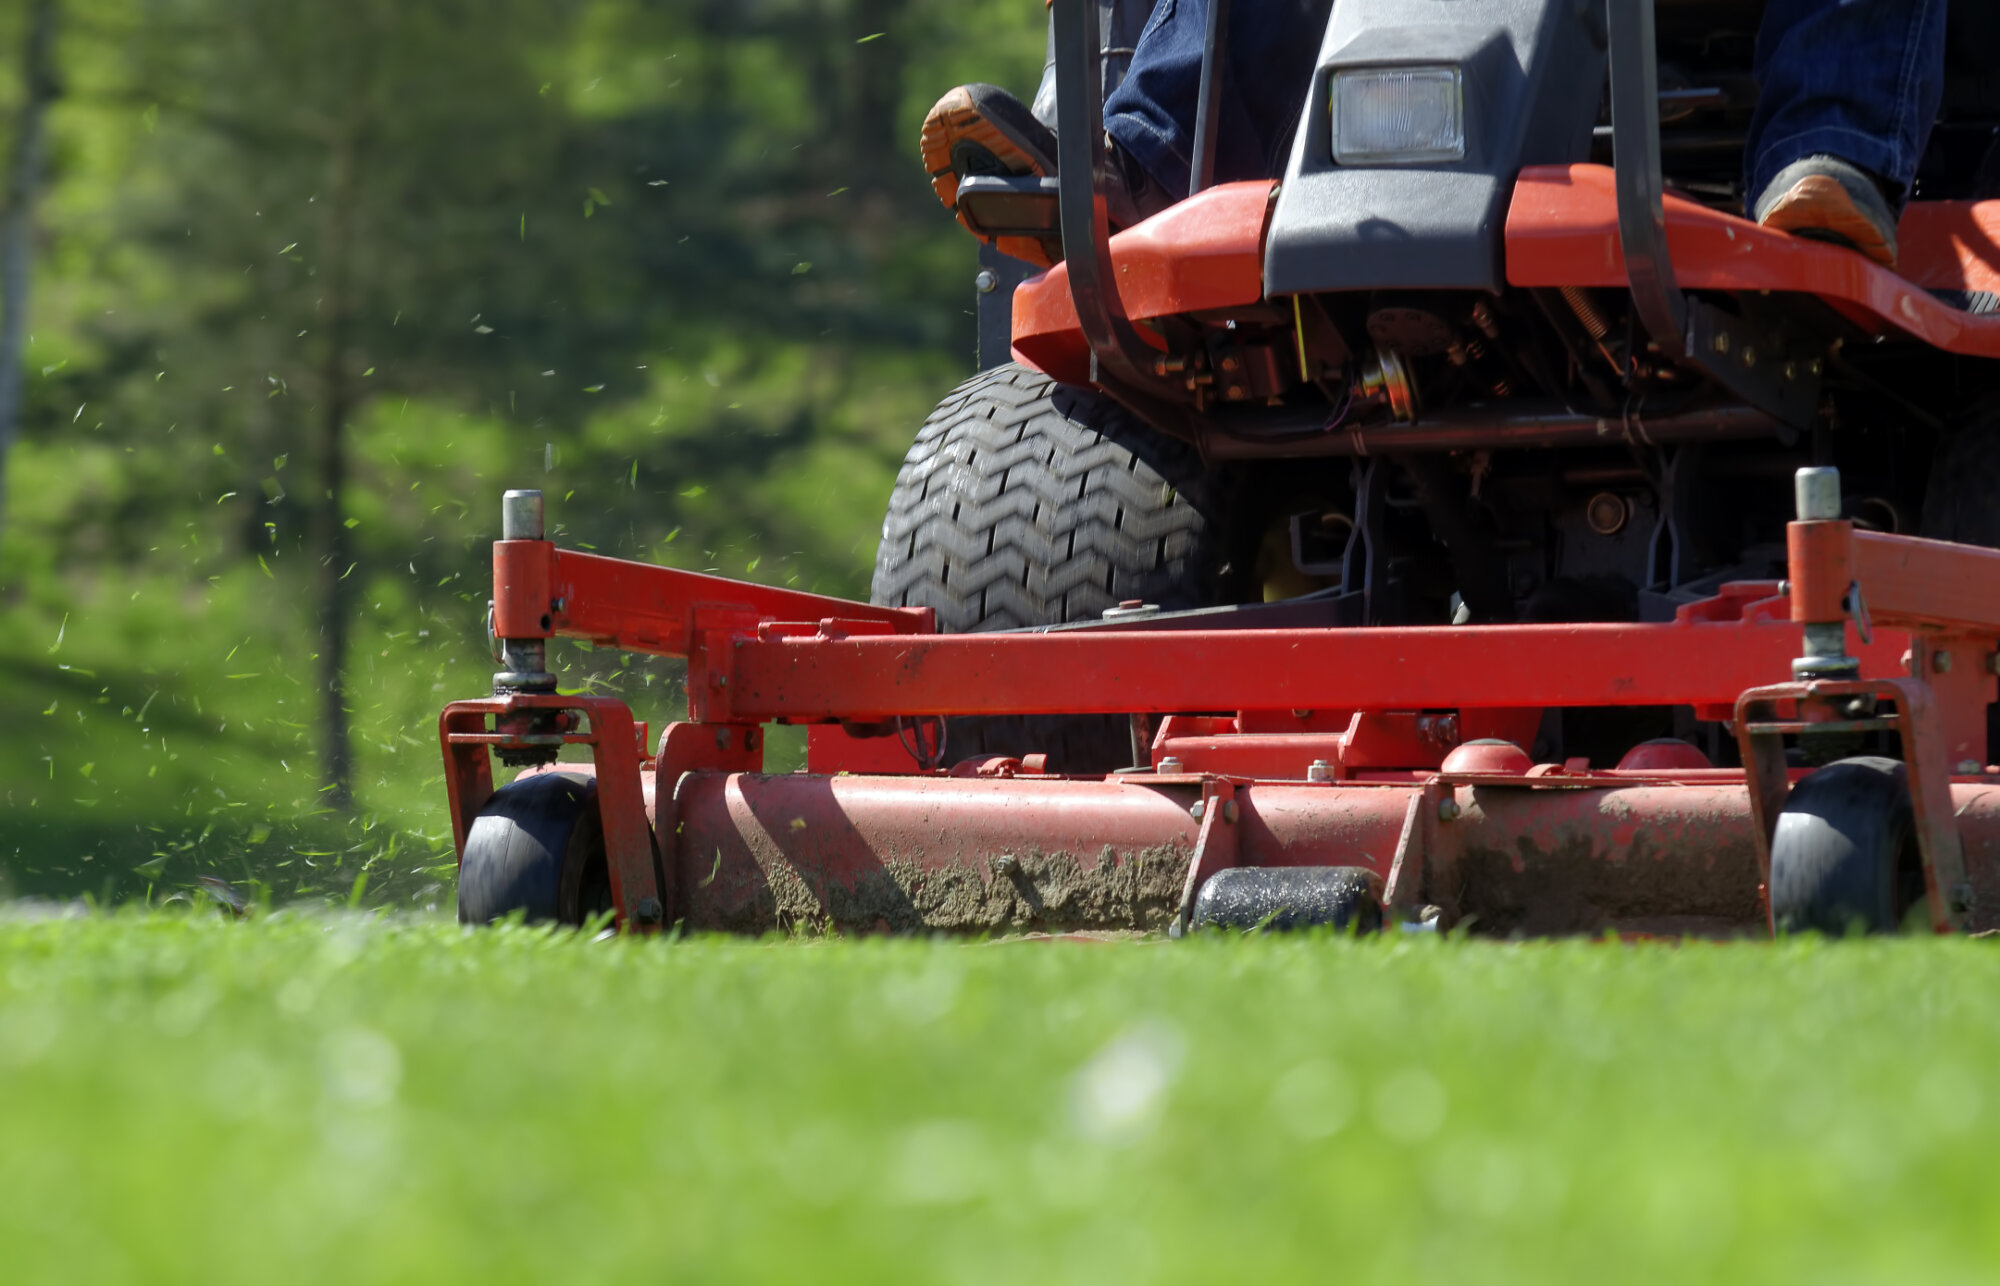 How to make sure you don’t get too much service when hiring a lawn care company